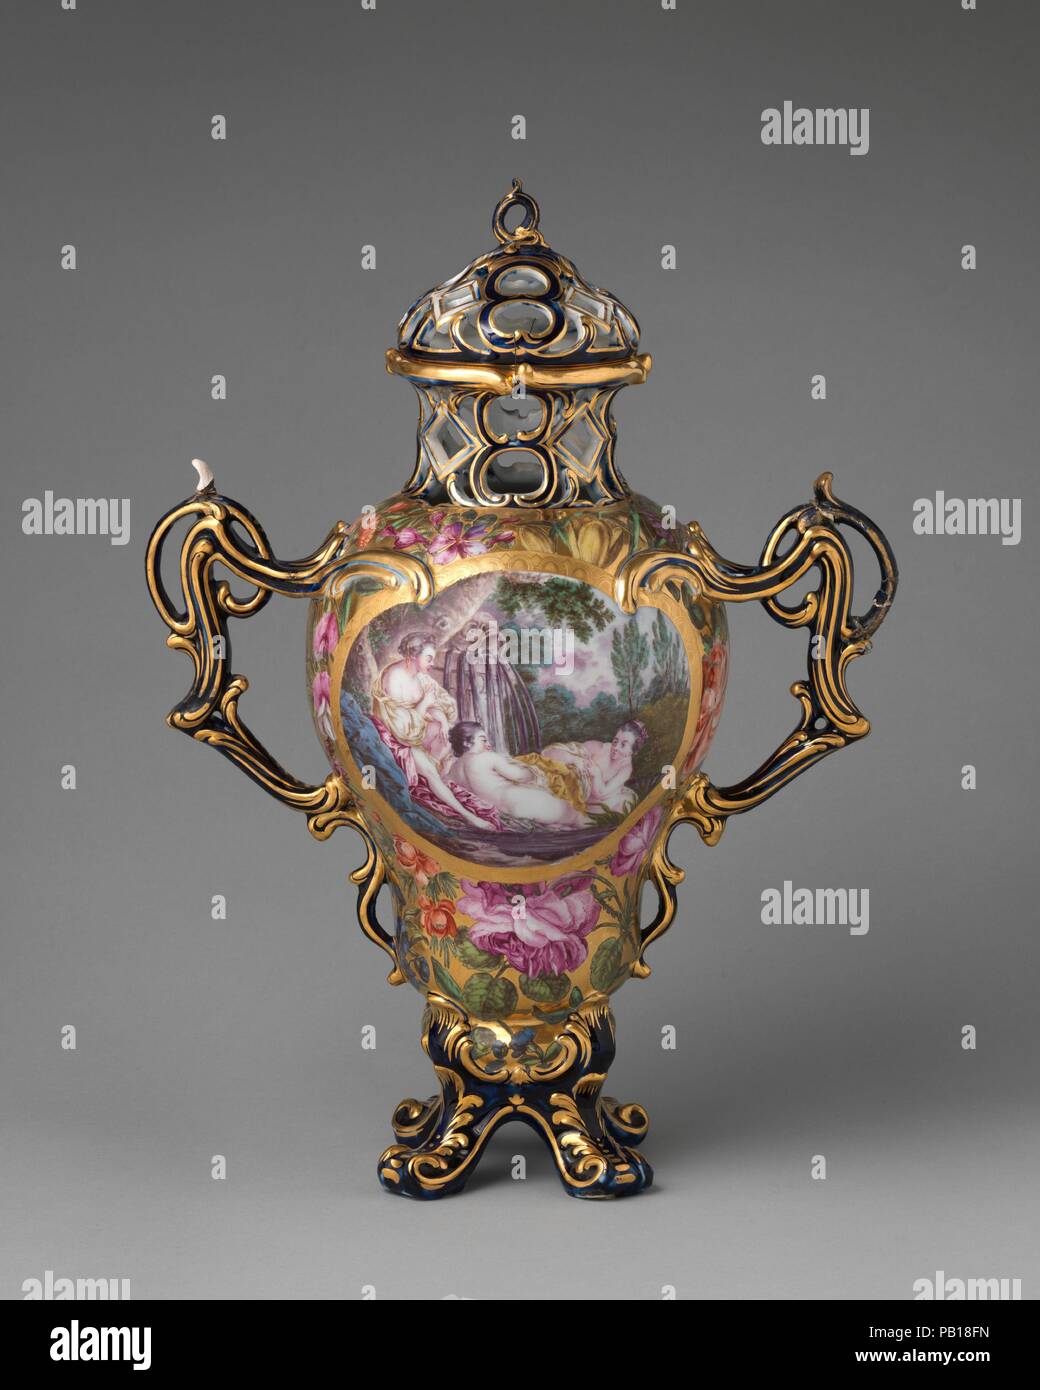 Perfume vase (one of a pair). Culture: British, Chelsea. Dimensions: Height: 14 in. (35.6 cm). Factory: Chelsea Porcelain Manufactory (British, 1745-1784, Gold Anchor Period, 1759-69). Date: ca. 1761.  The scenes depict: (left) three nymphs after the painting La Source by Francois Boucher (1703-1770); and (right) Jupiter disguised as Diana with Diana's nymph Callisto, after an engraving by Rene Galliard (1719-1790) of a painting of 1759 by Boucher. Museum: Metropolitan Museum of Art, New York, USA. Stock Photo